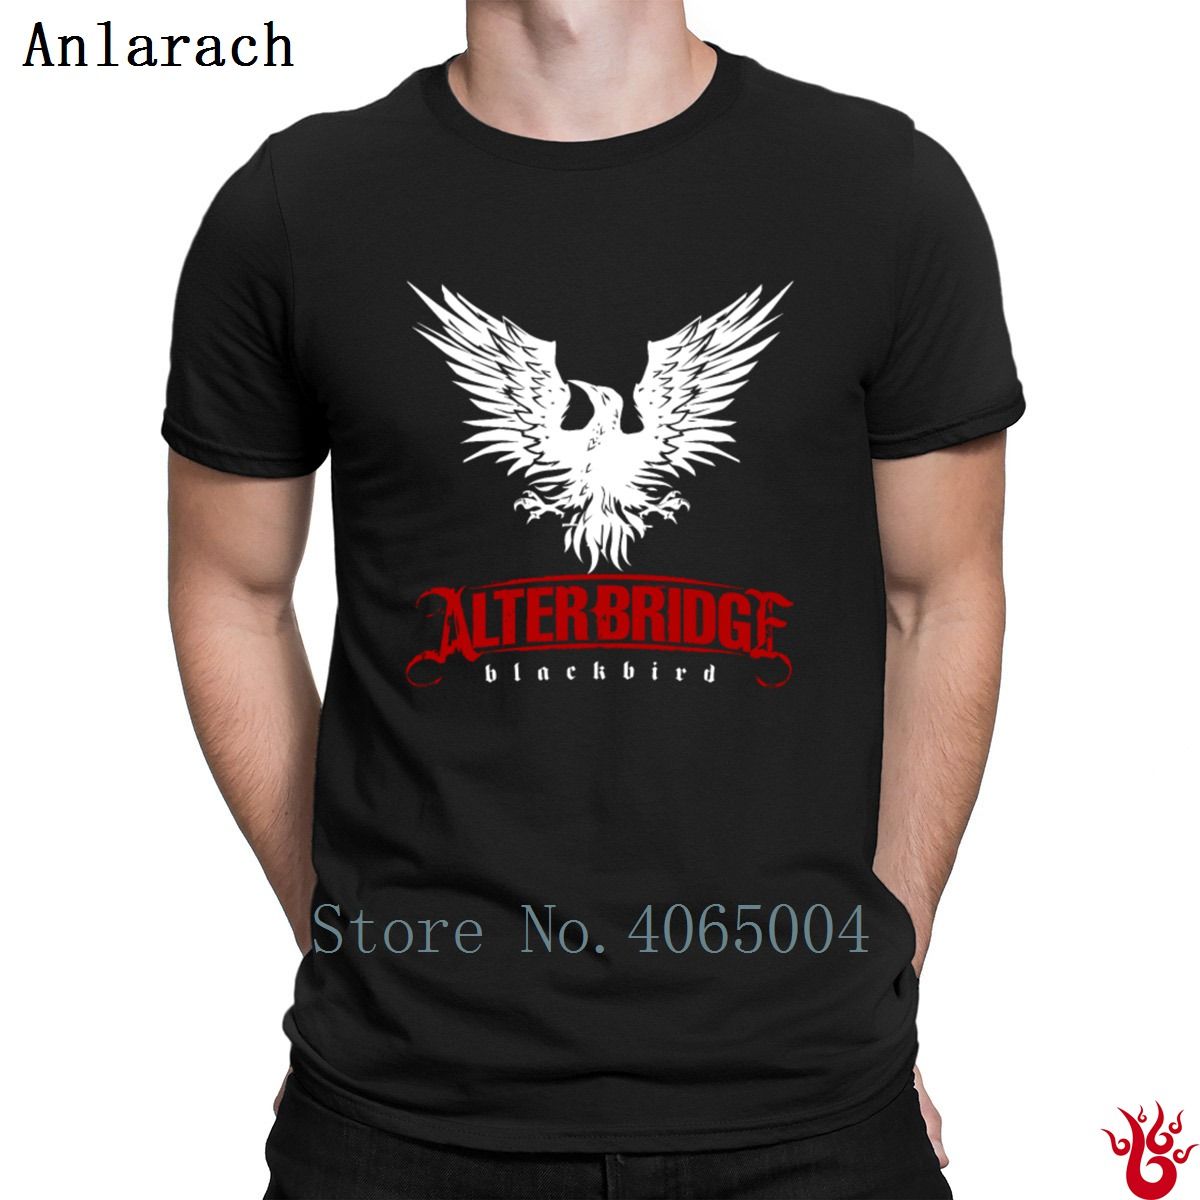 Alter Bridge Black Bird Tshirts Standard Funny Leisure Famous Mens T Shirt Summer Designs Hiphop Tee Shirt Size S 3xl Cotton Awesome T Shirts Designs Cool Funny Shirts From Lfdhno2 16 15 Dhgate Com